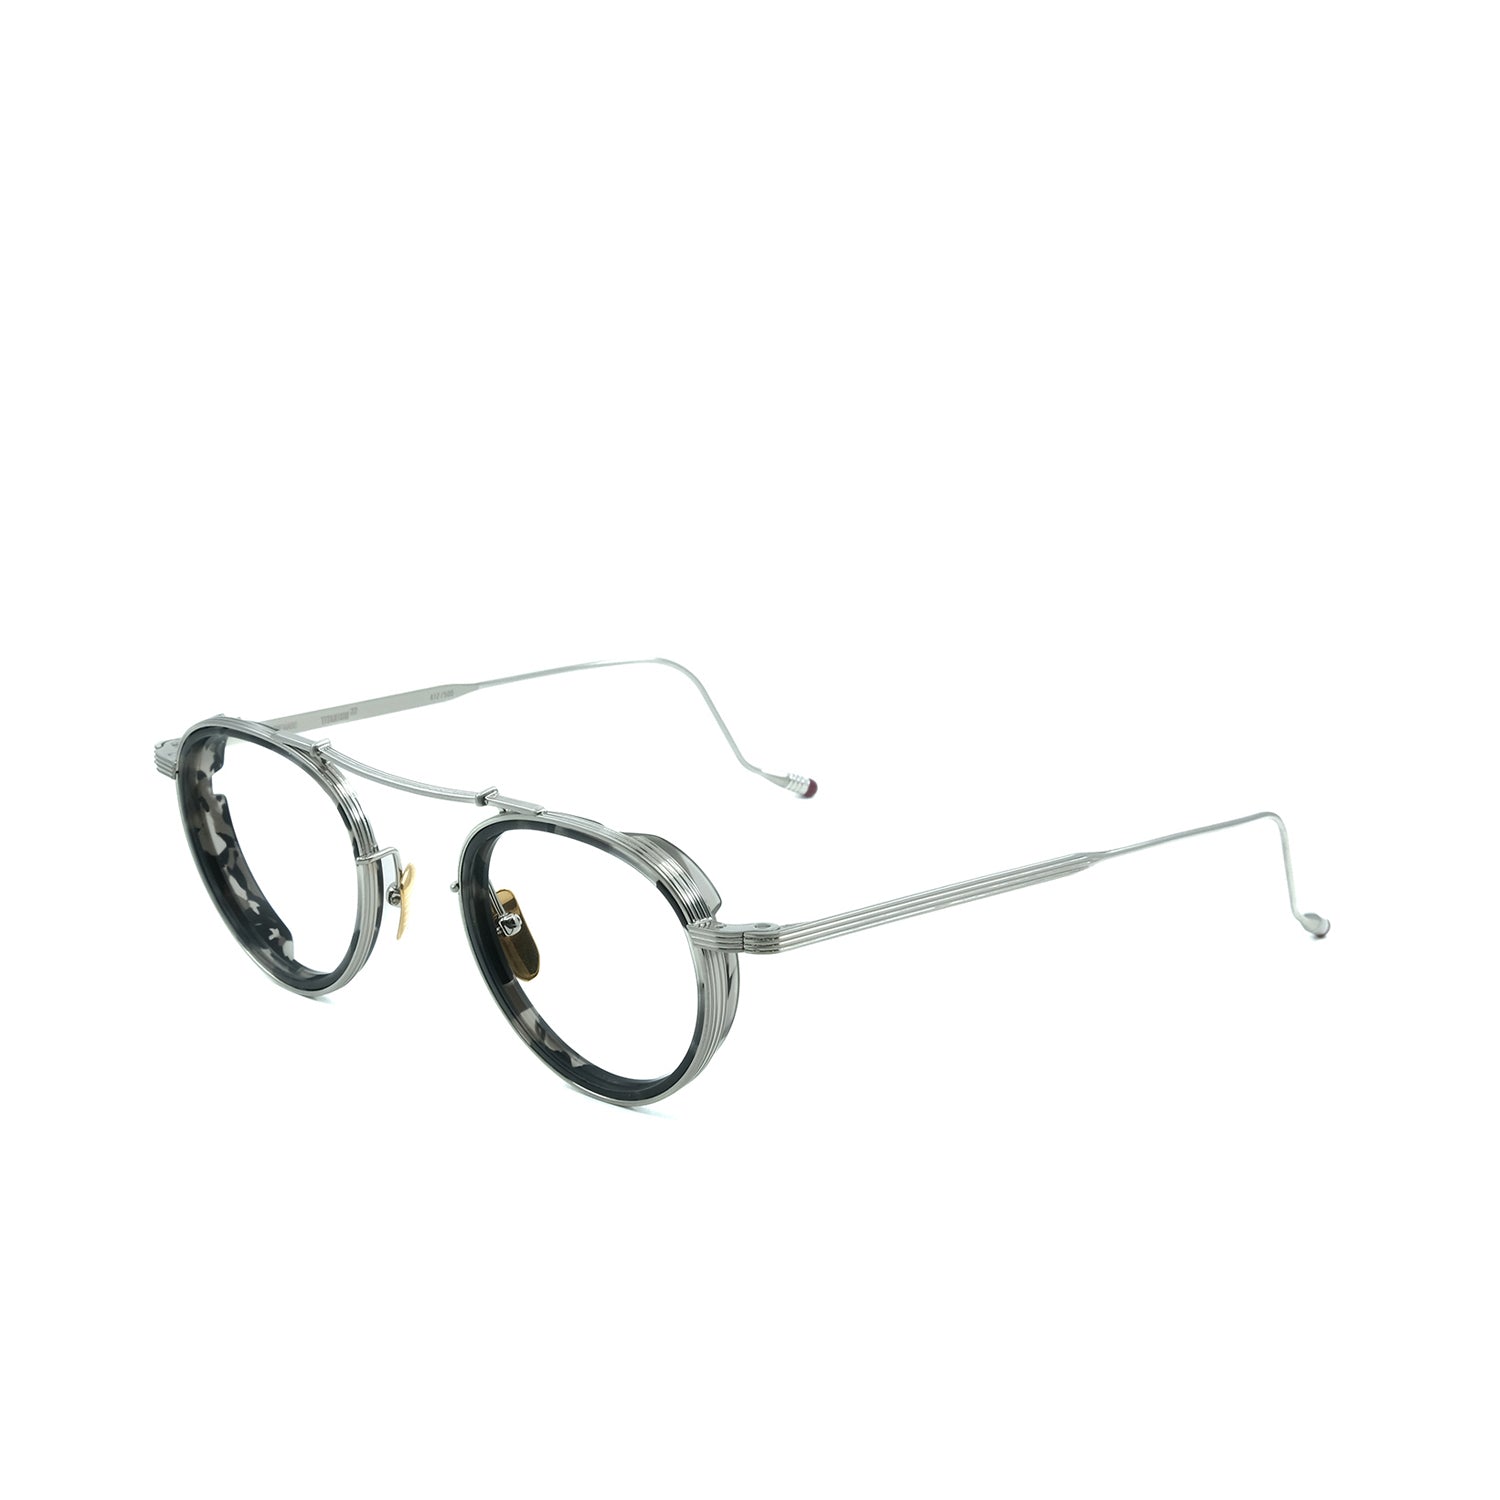 JACQUES MARIE MAGE APOLLINAIRE 2 DESIGNER FRAME